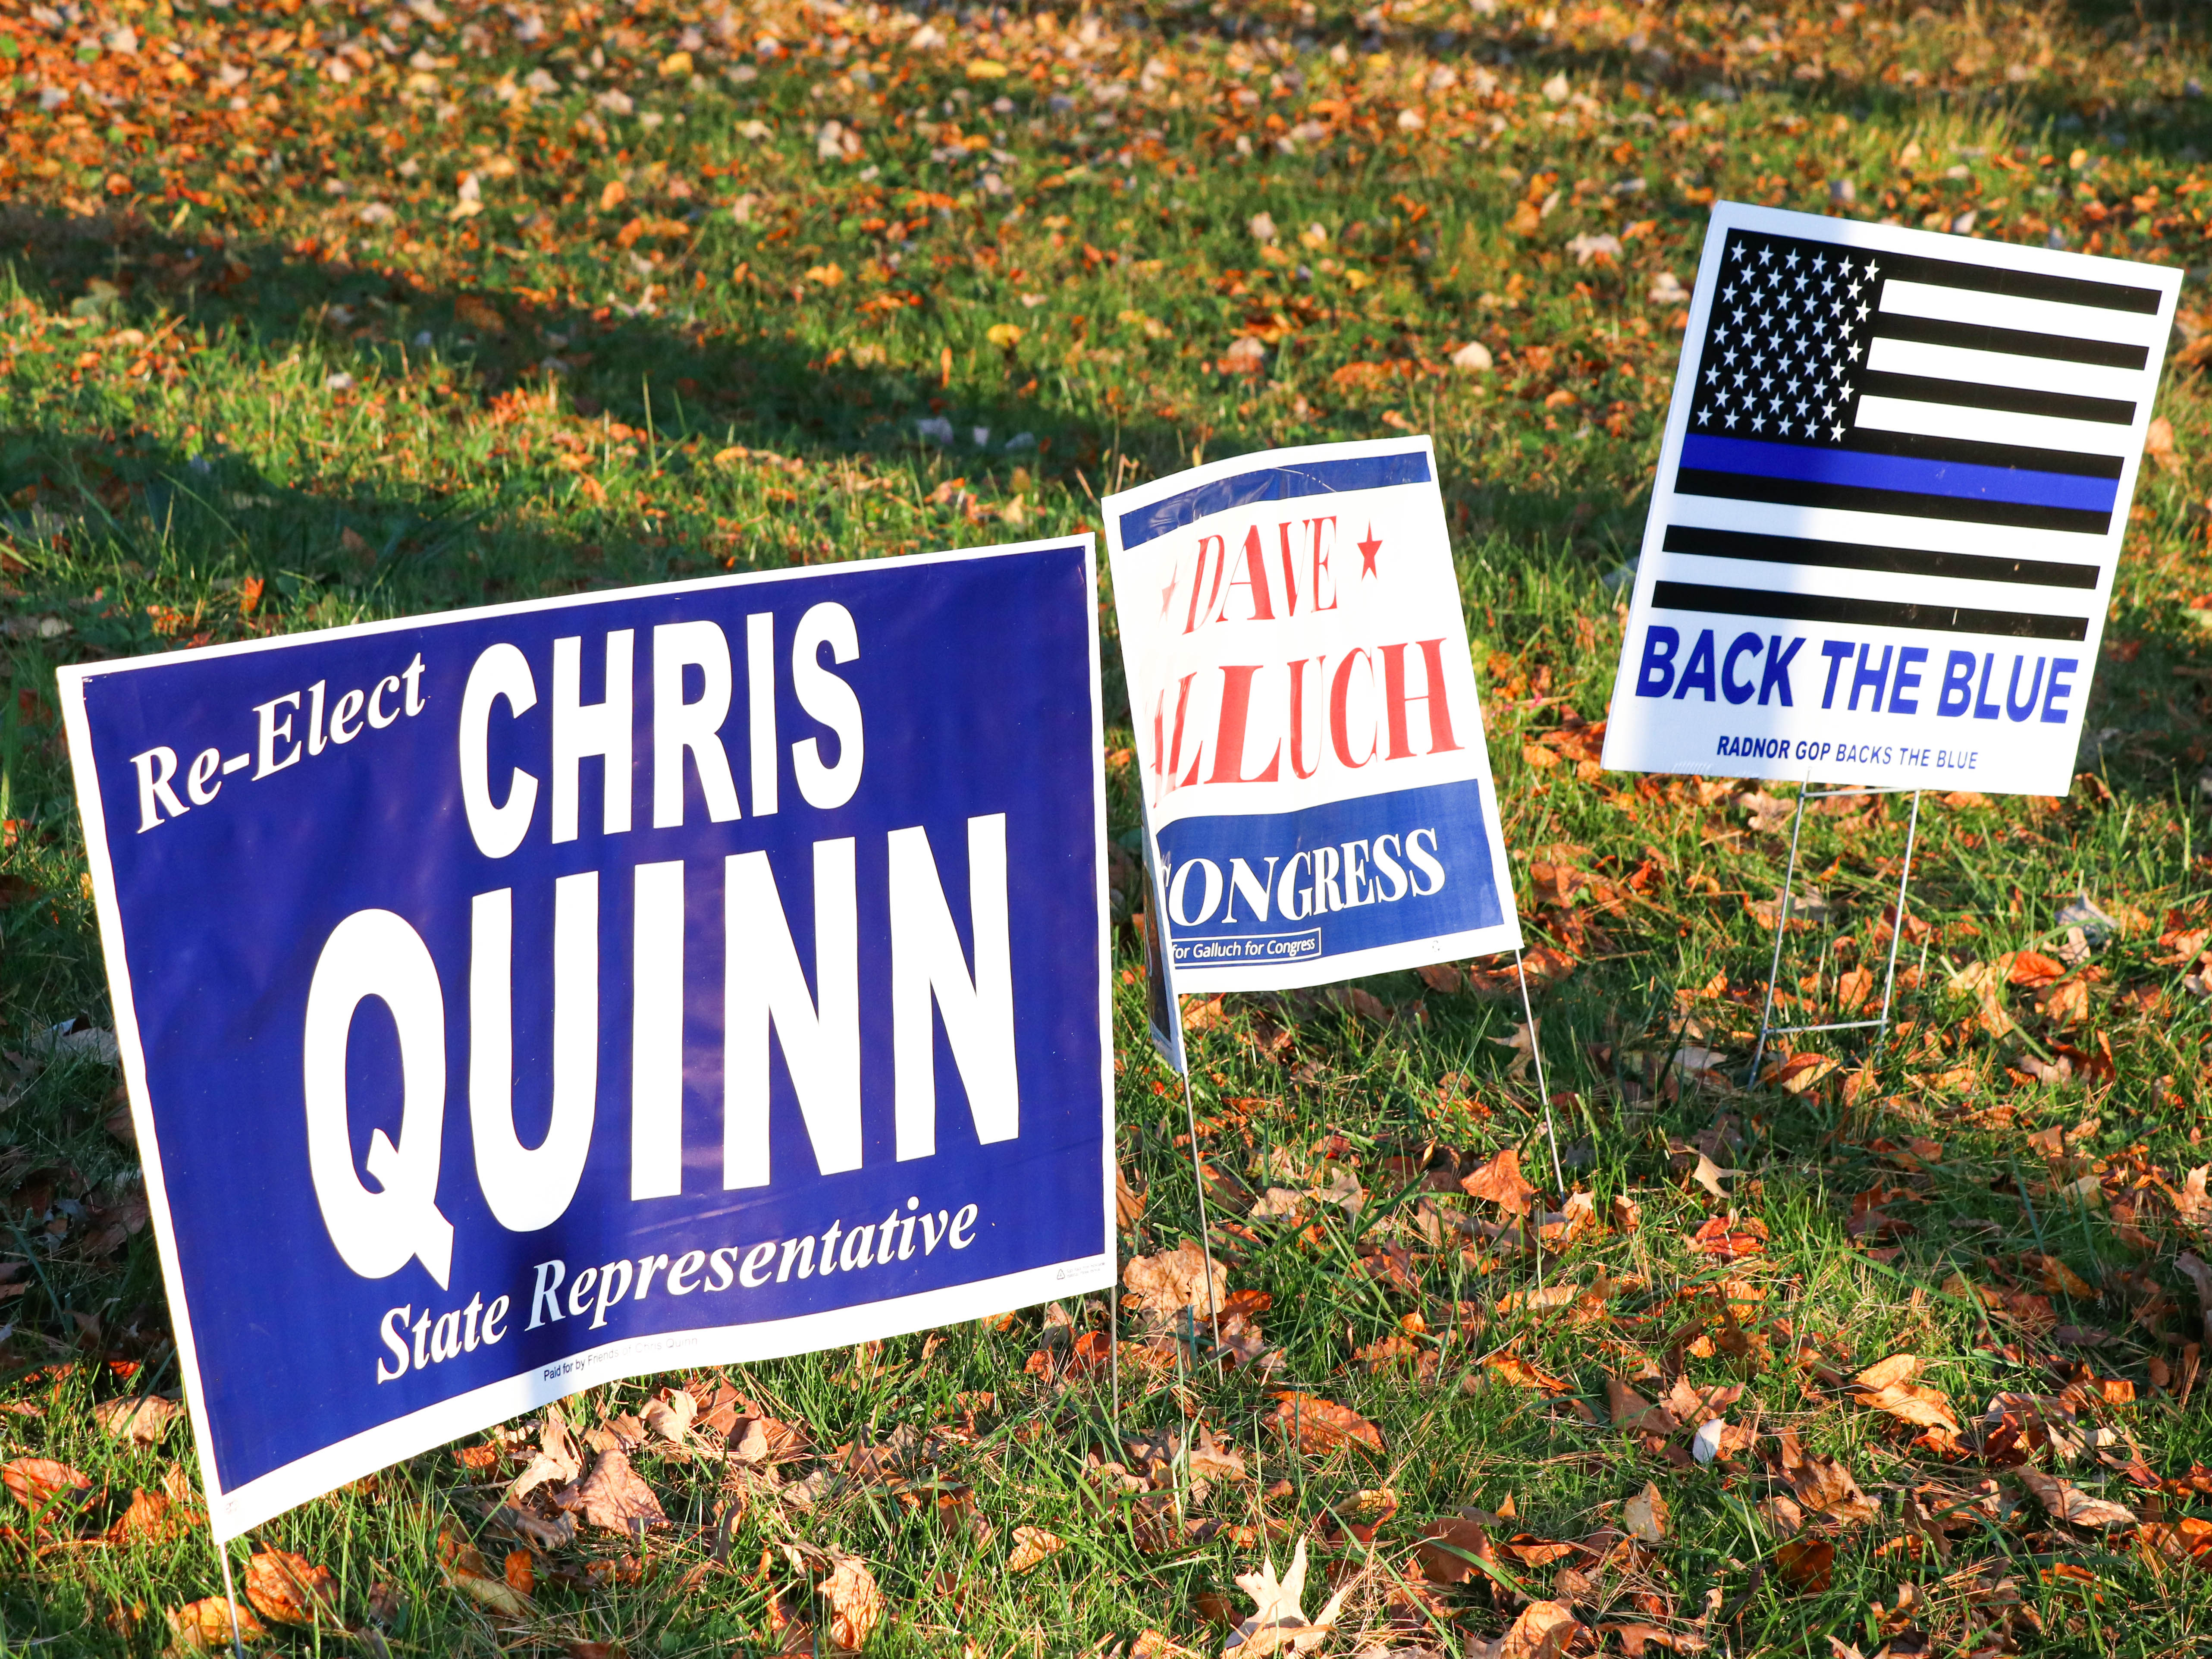 Three small campaign signs lined up in a row, facing the right among the fall leaves. The first sign in blue says "Re-Elect Chris Quinn: State Representative". The second sign is illegible, and the last sign says "Back The Blue." 